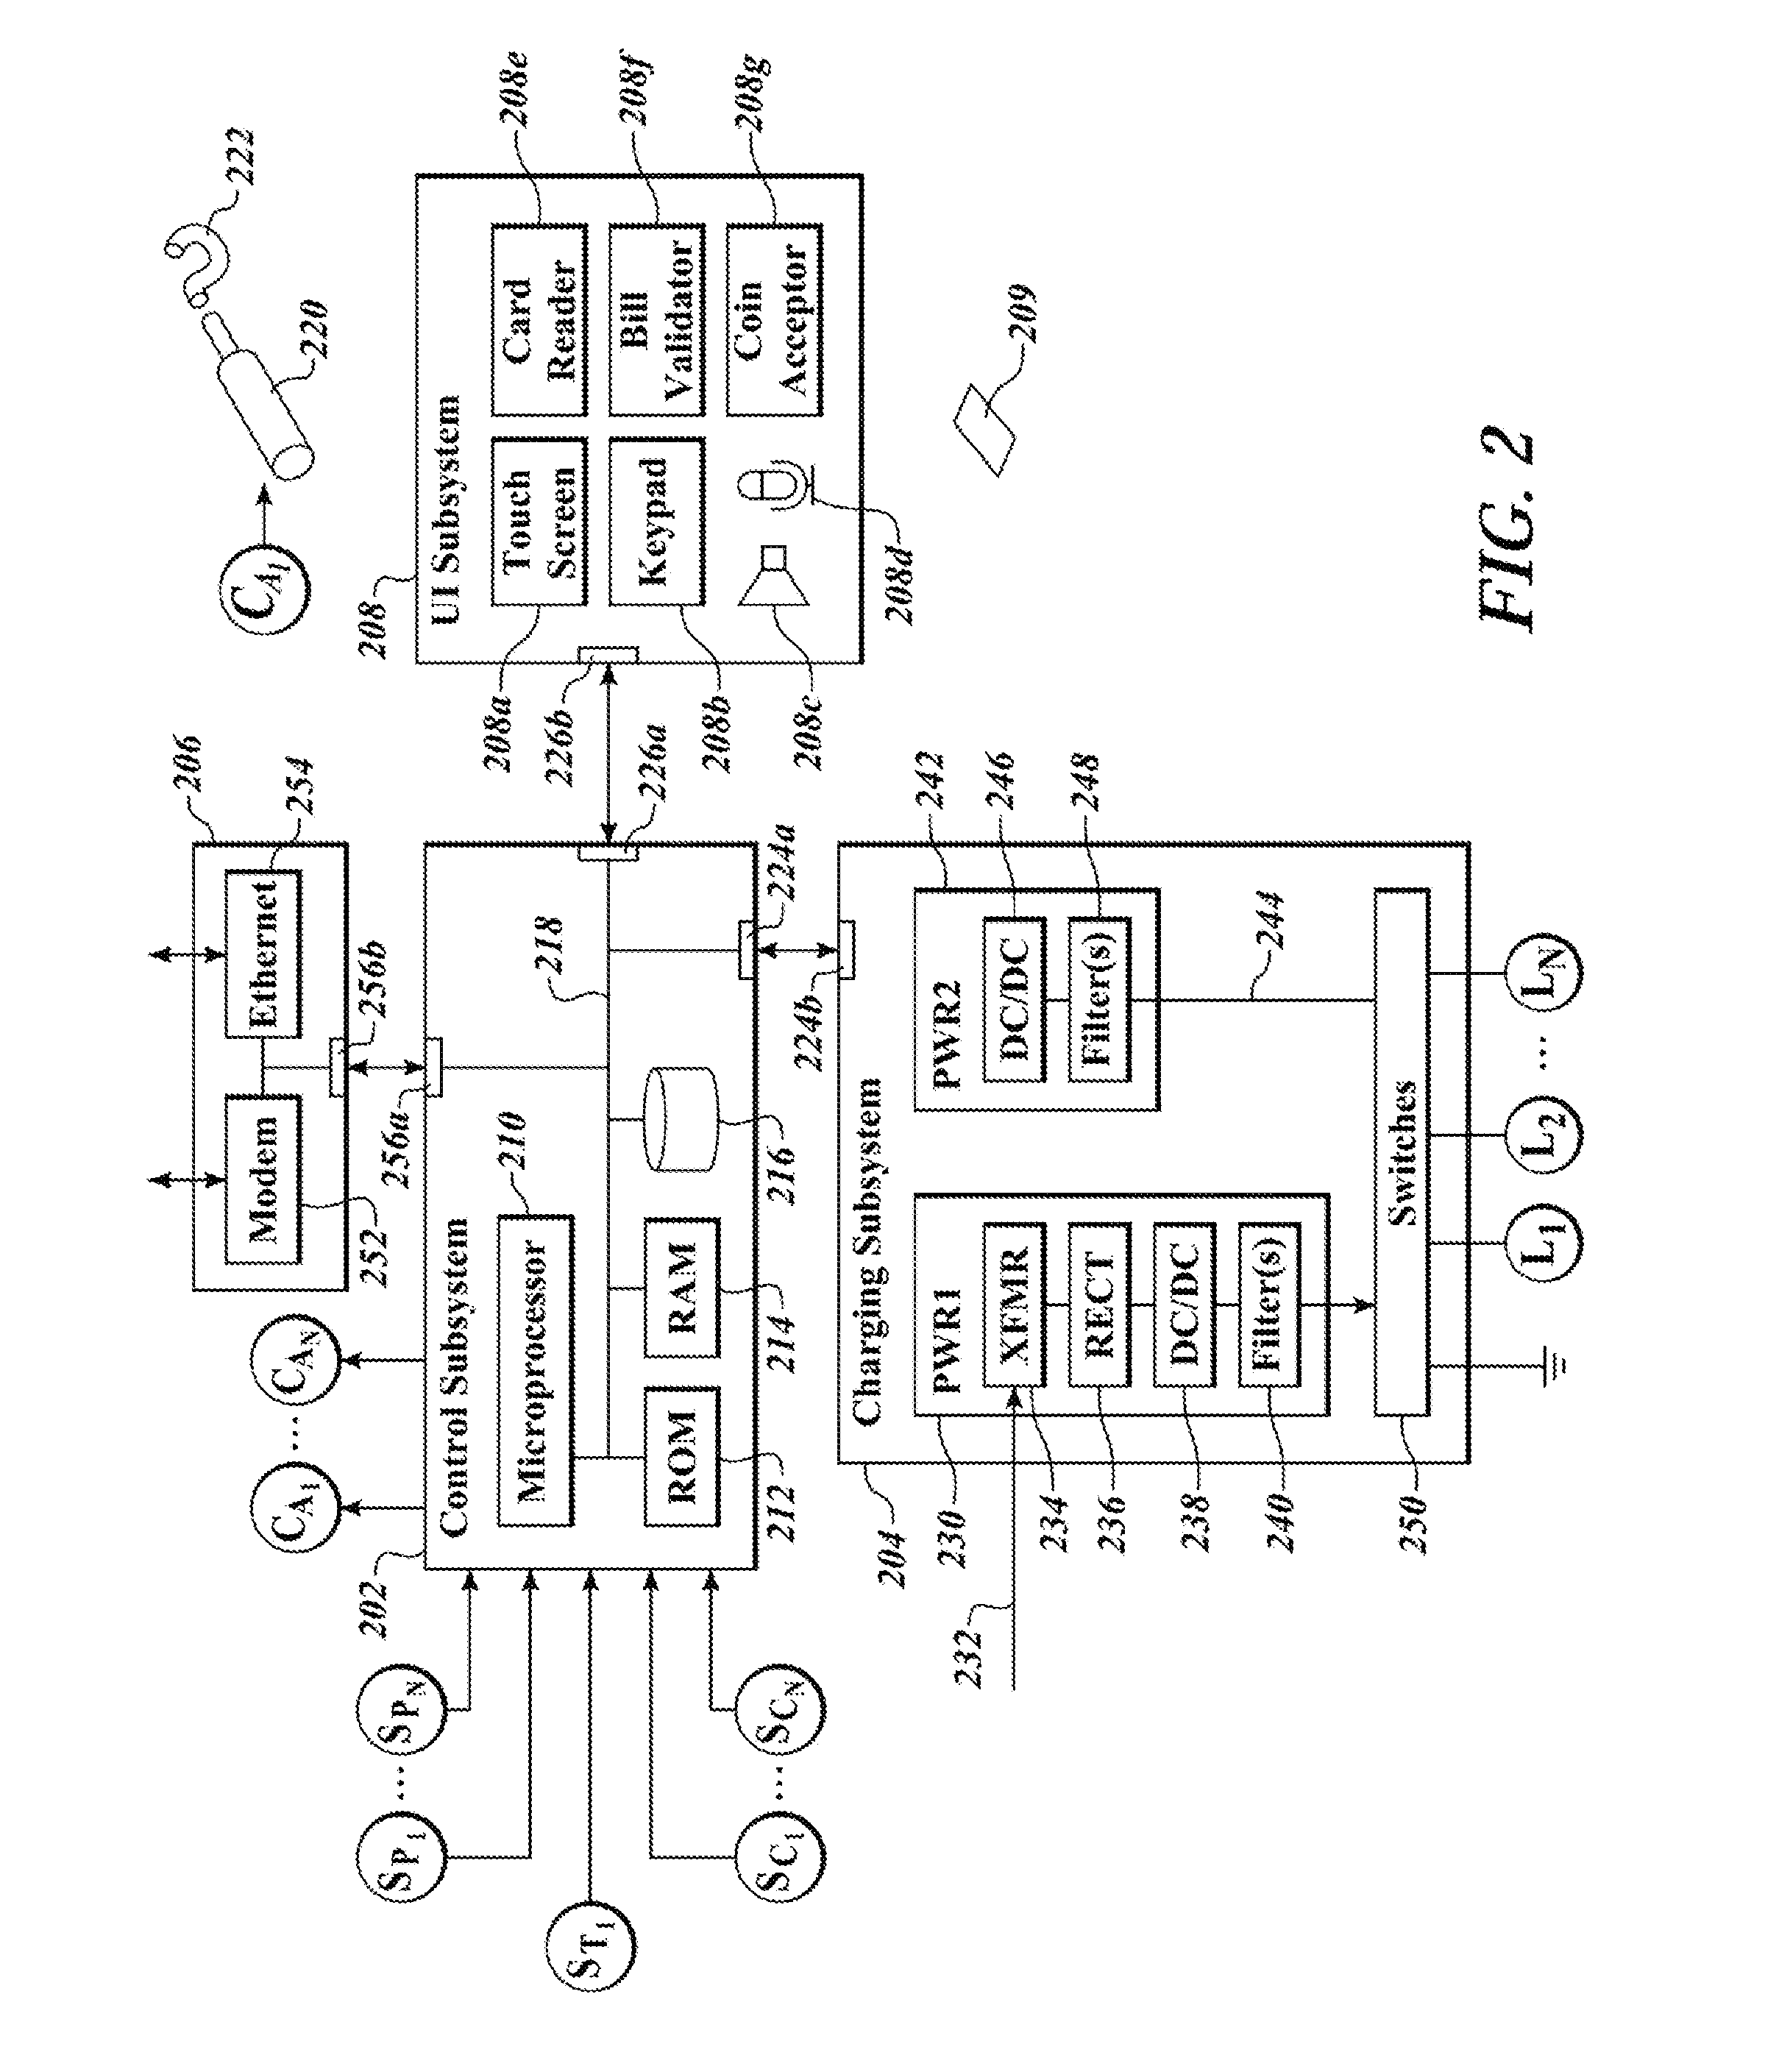 Apparatus, method and article for power storage device failure safety